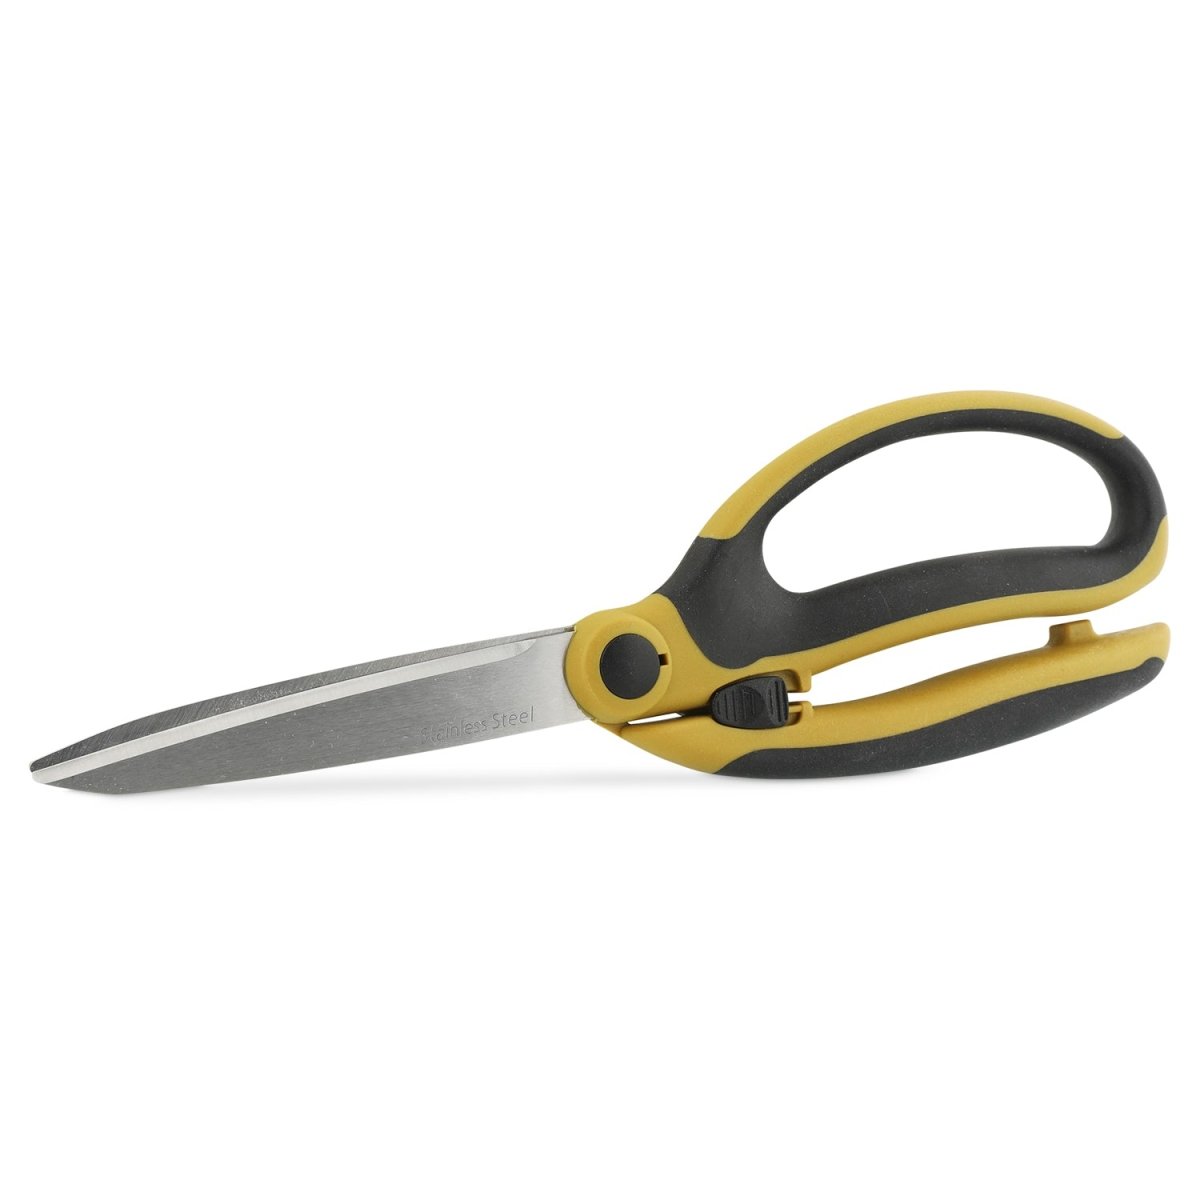 Discover our spring loaded scissors and reduce your hand strain by